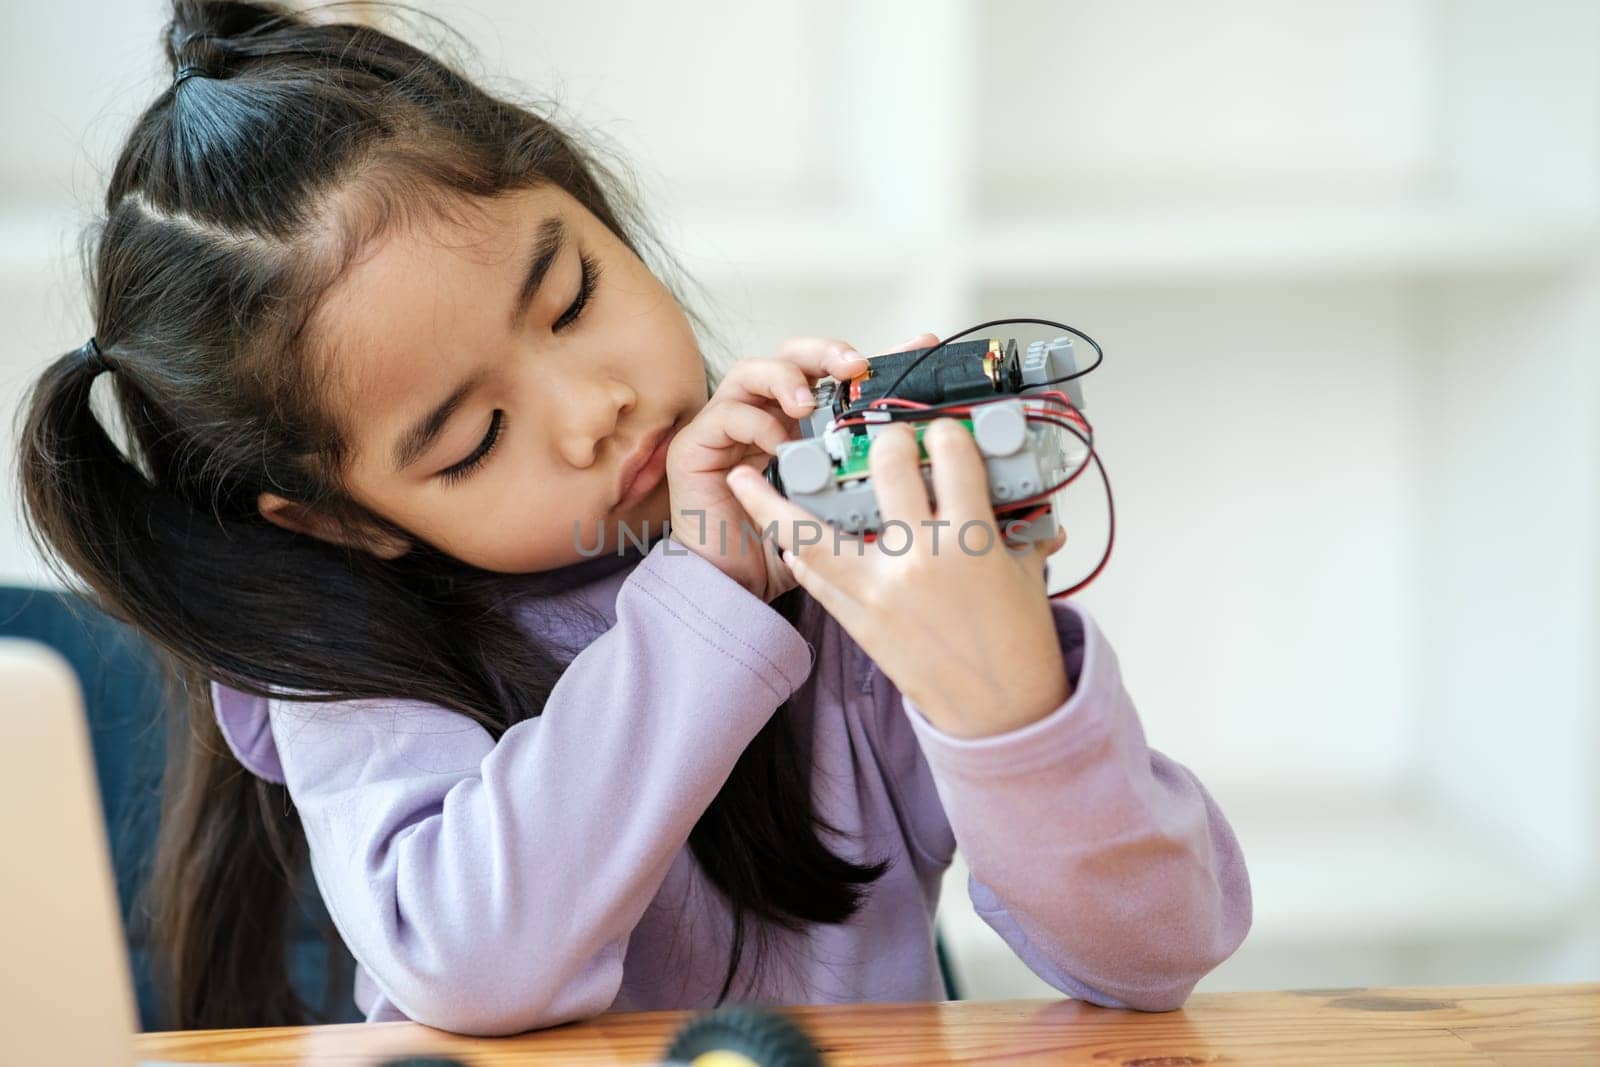 Asian girl concentrating on building a robot, embodying STEM education.